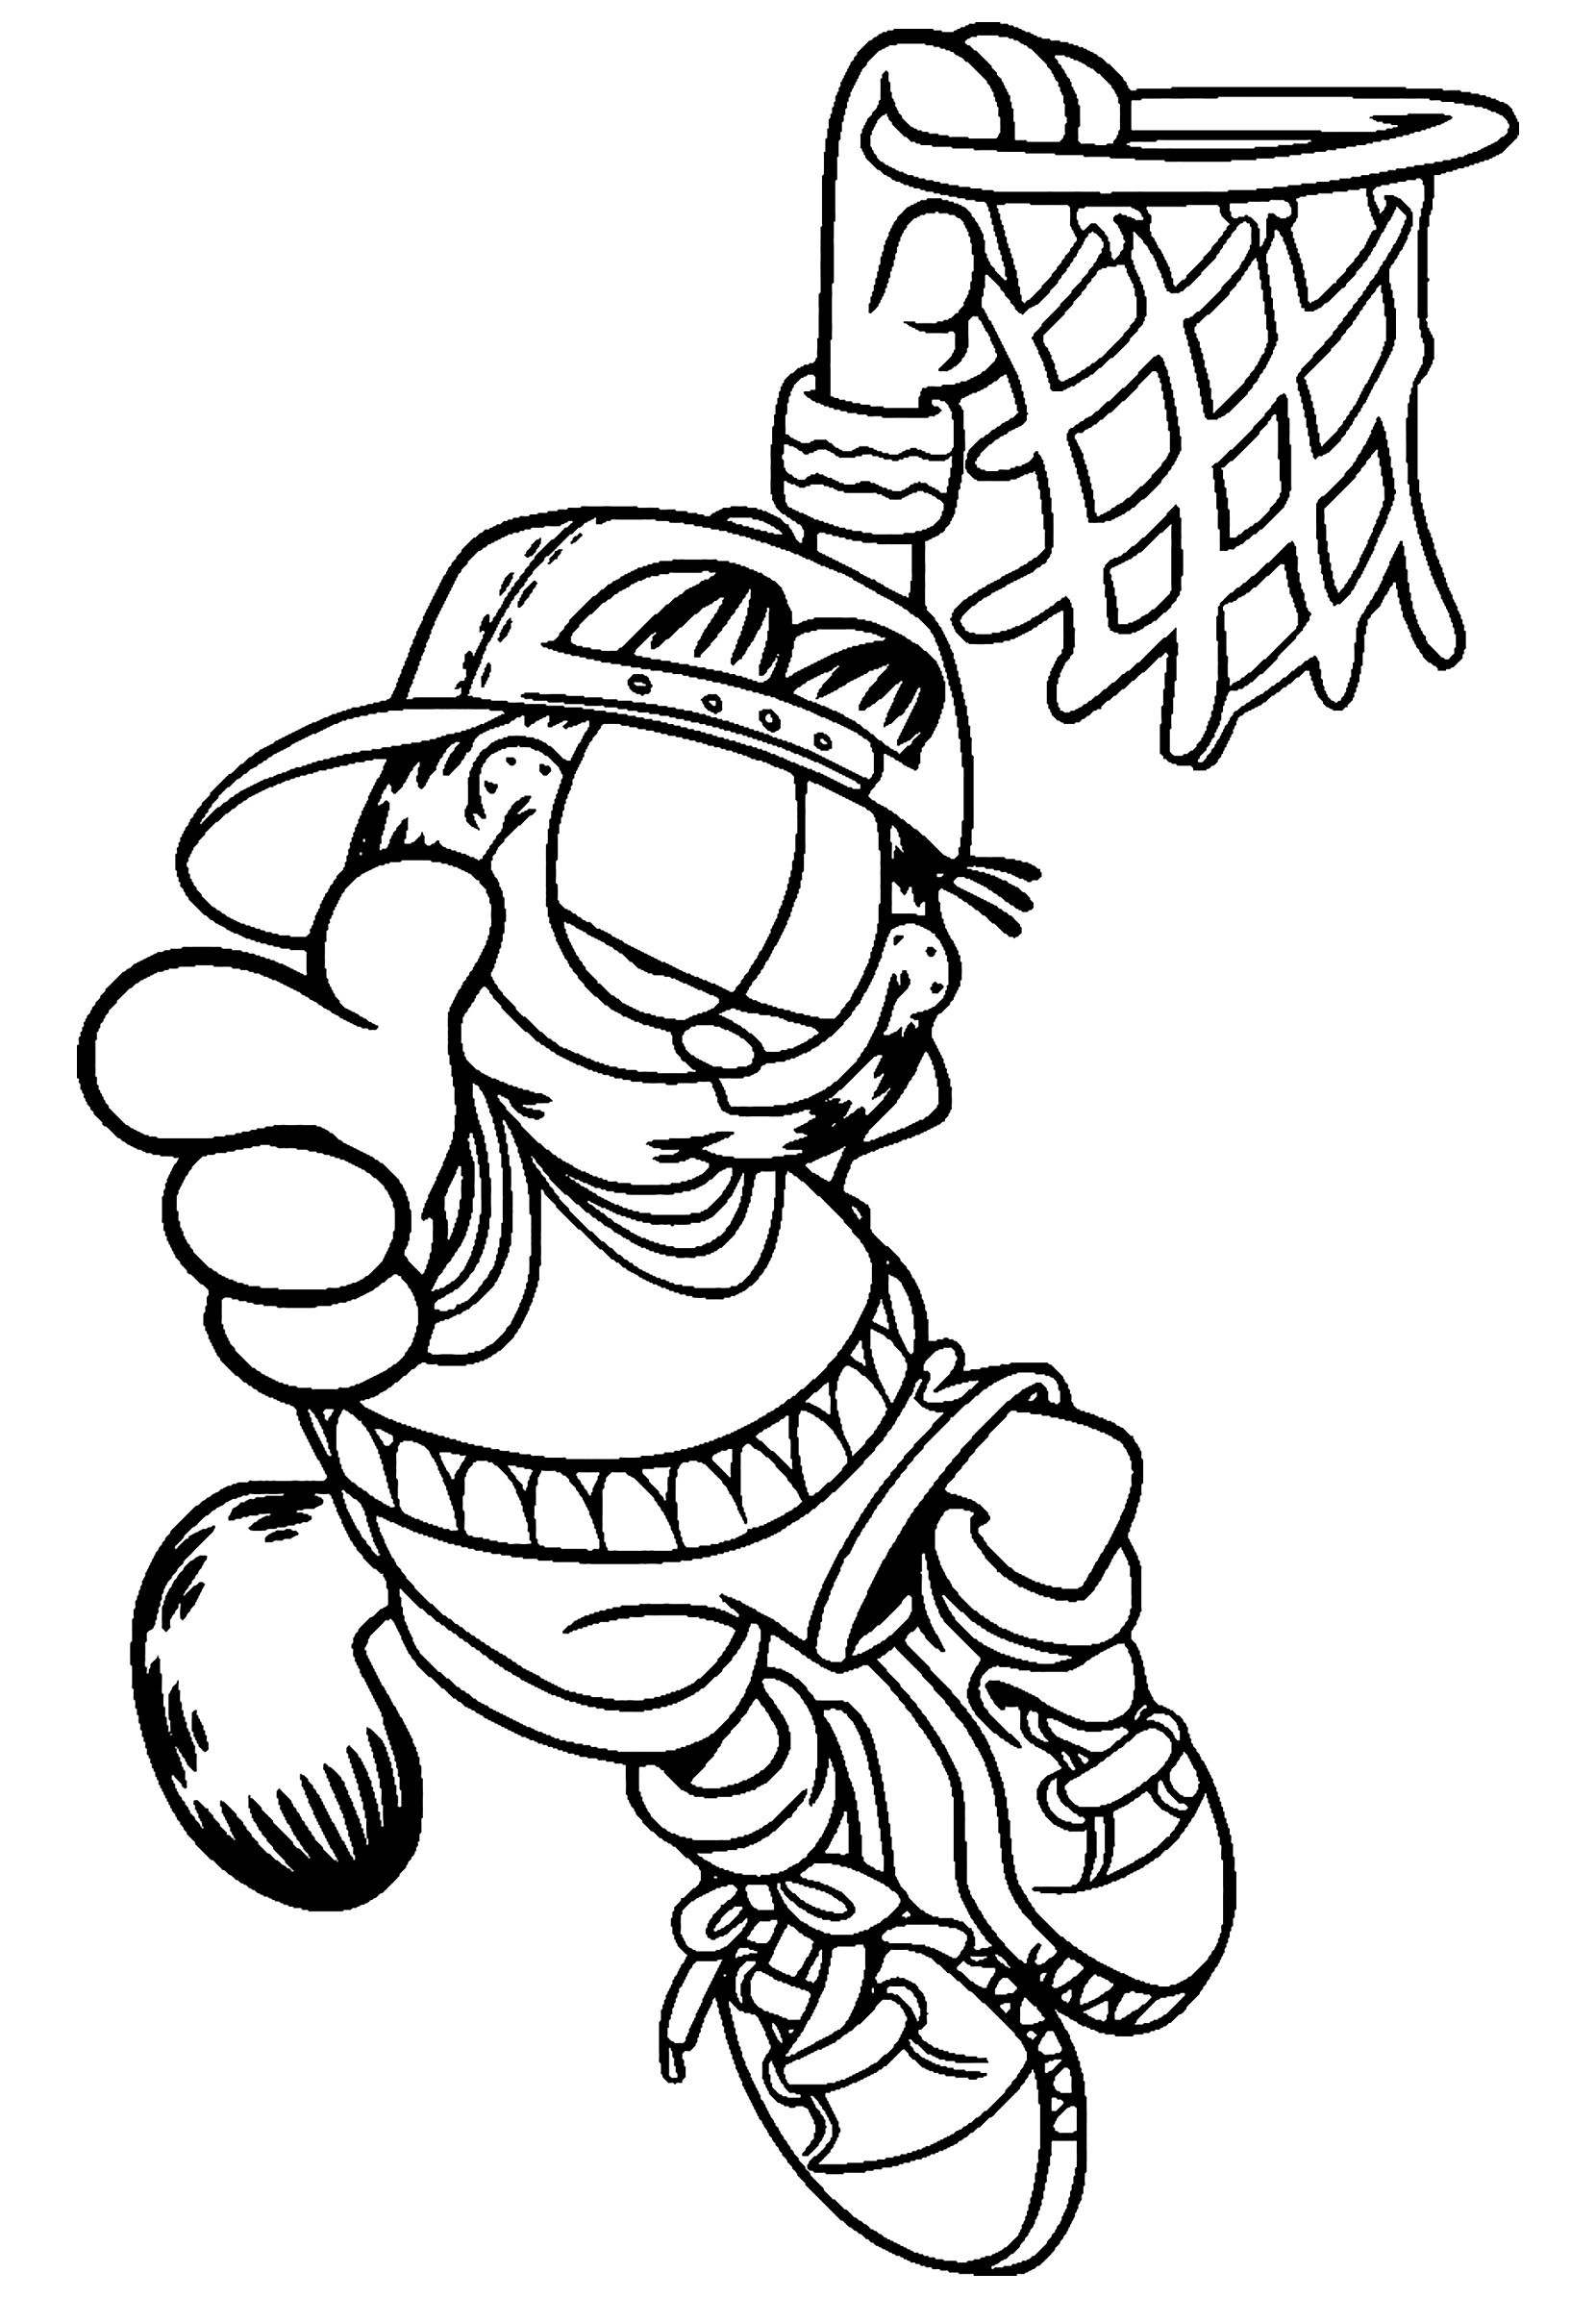 Kids Coloring Sheets
 Garfield to Garfield Kids Coloring Pages